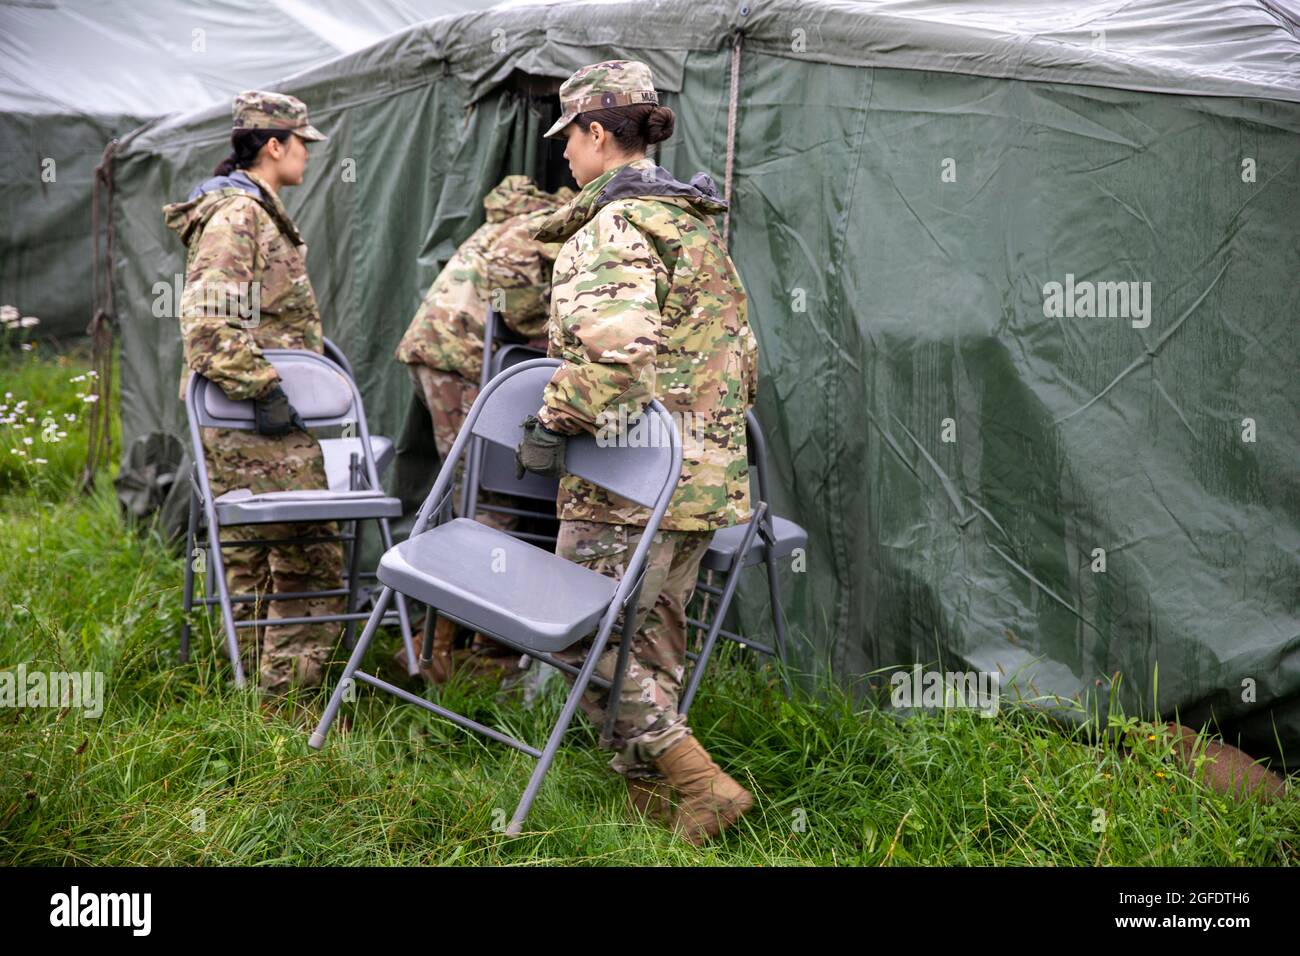 Soldiers assigned to 41st Field Artillery Brigade build tents to make Camp  Kasserine ready to recieve Afghan evacuees in Grafenwohr, Germany Aug. 23,  2021. U.S. Army Europe and Africa is working hand-in-hand